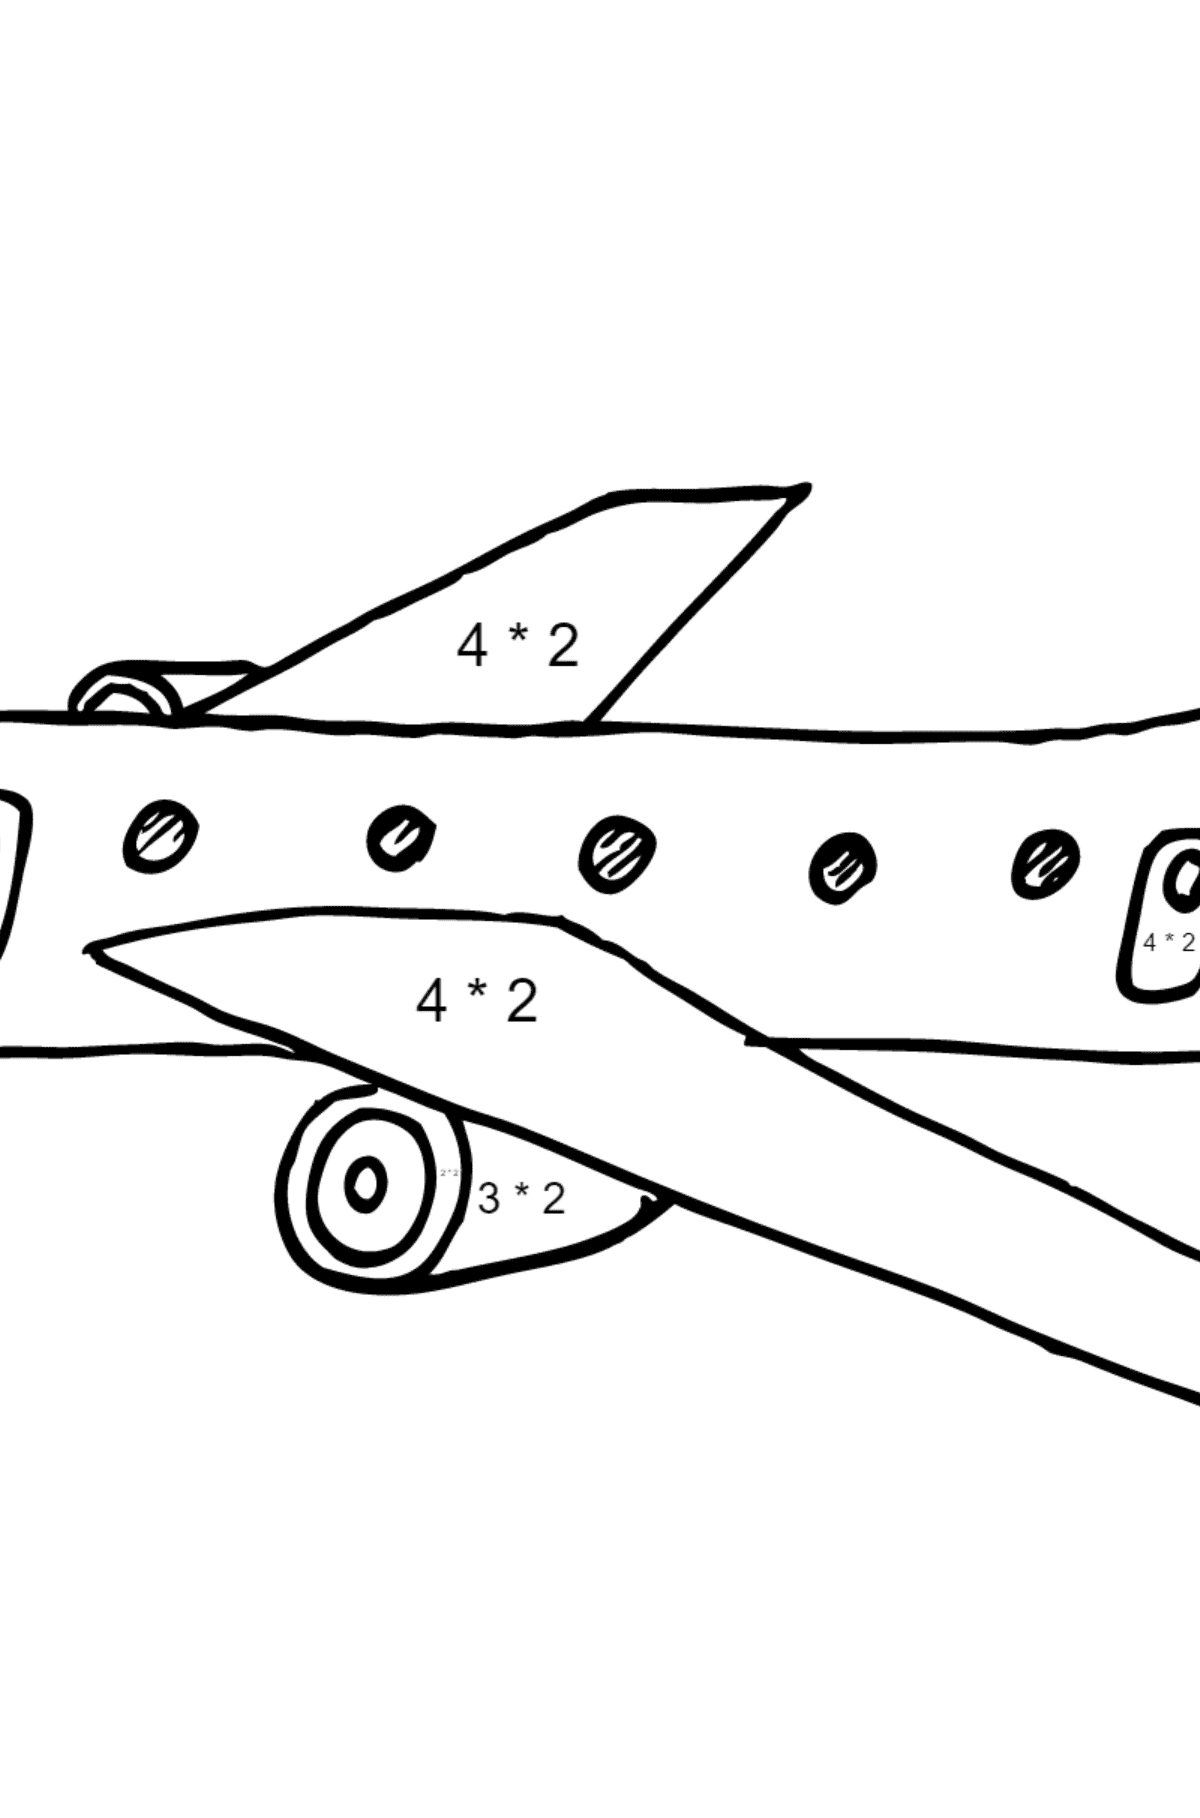 Coloring Page - A Commercial Jet - Math Coloring - Multiplication for Children